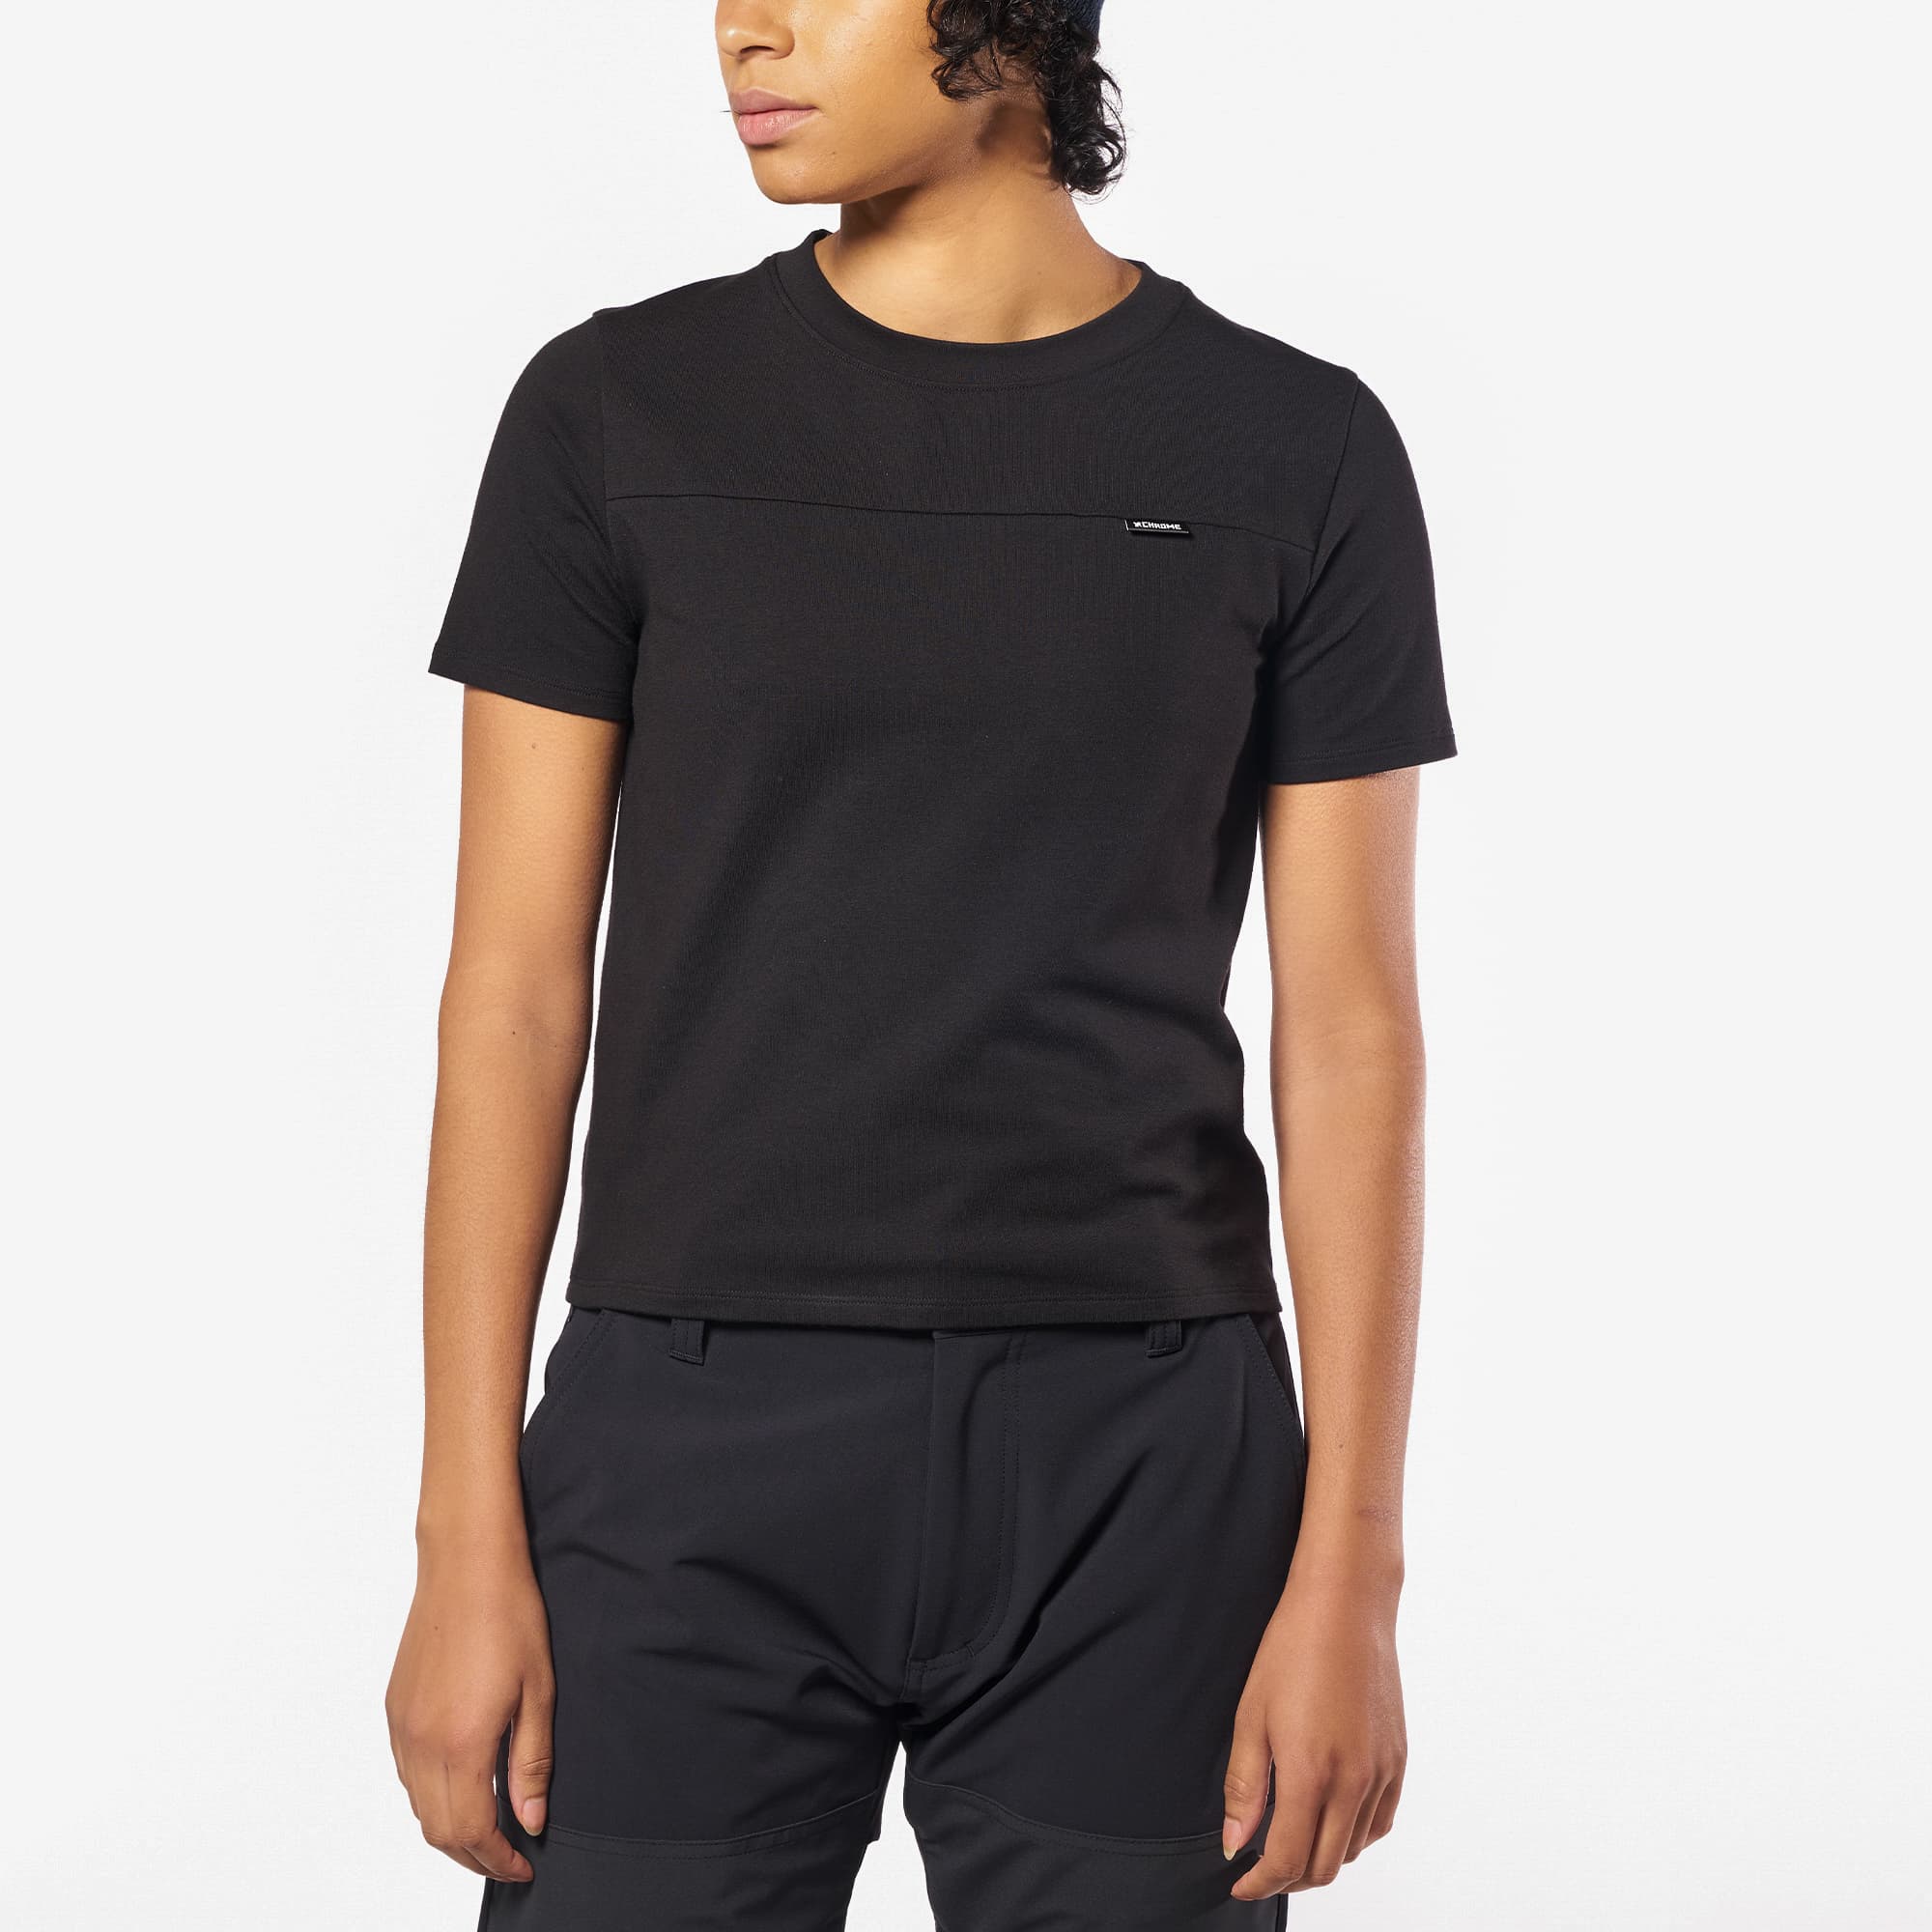 Woman's Holman performance Tee in black worn by a woman